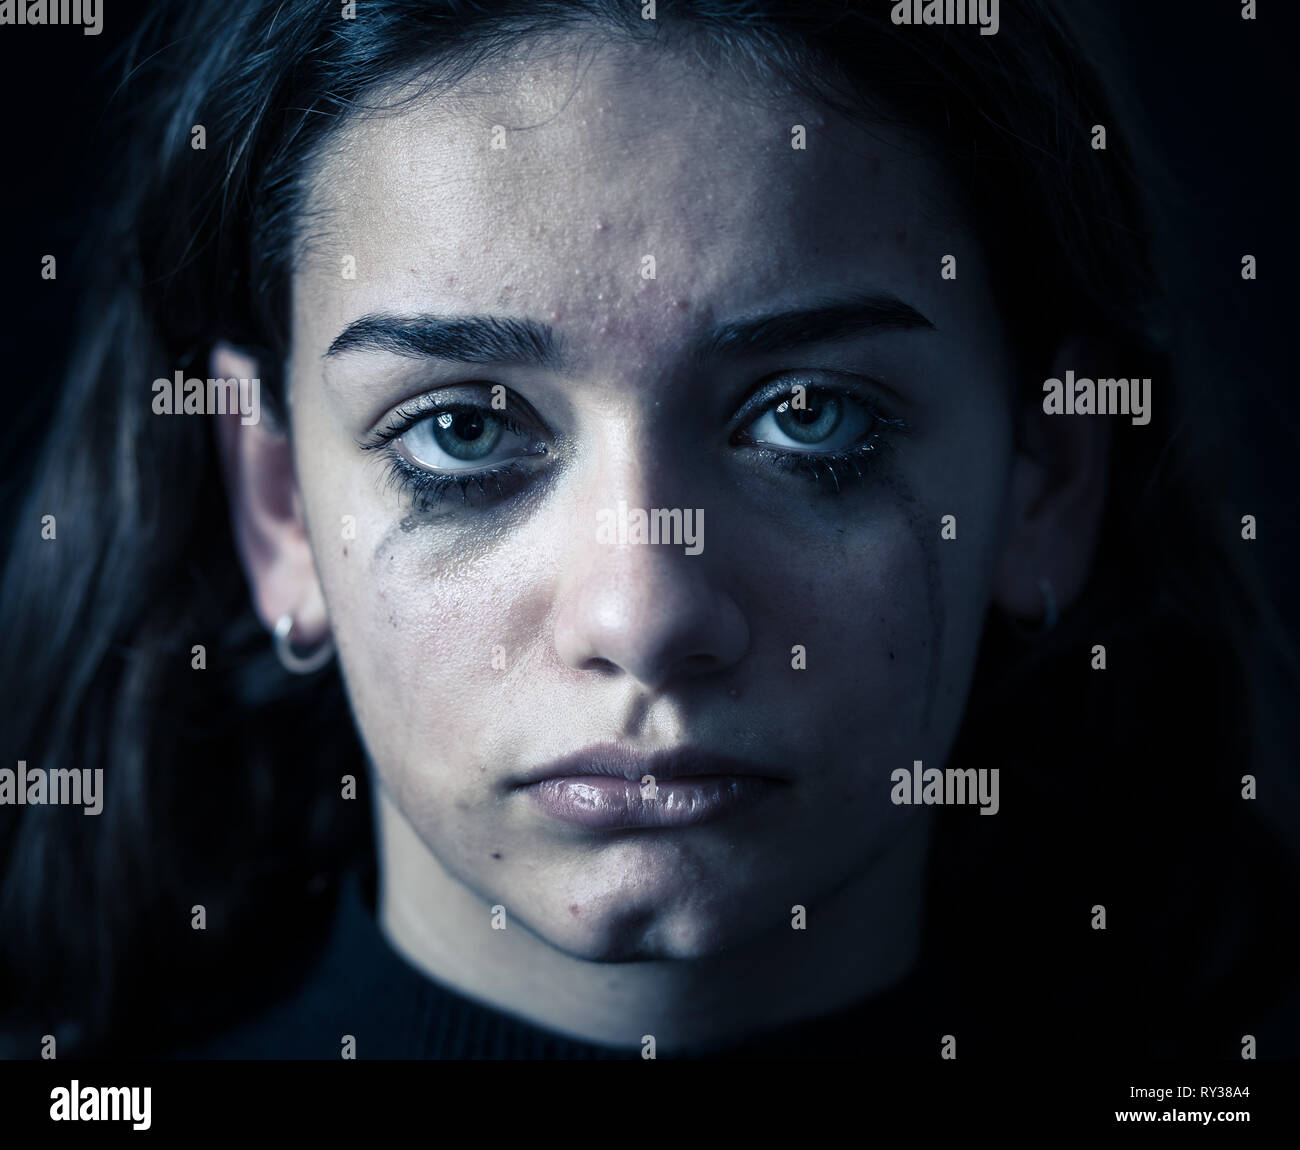 Scared upset girl bullied online suffering harassment crying feeling desperate and intimidated. Child victim of cyberbullying, stalker, social media a Stock Photo